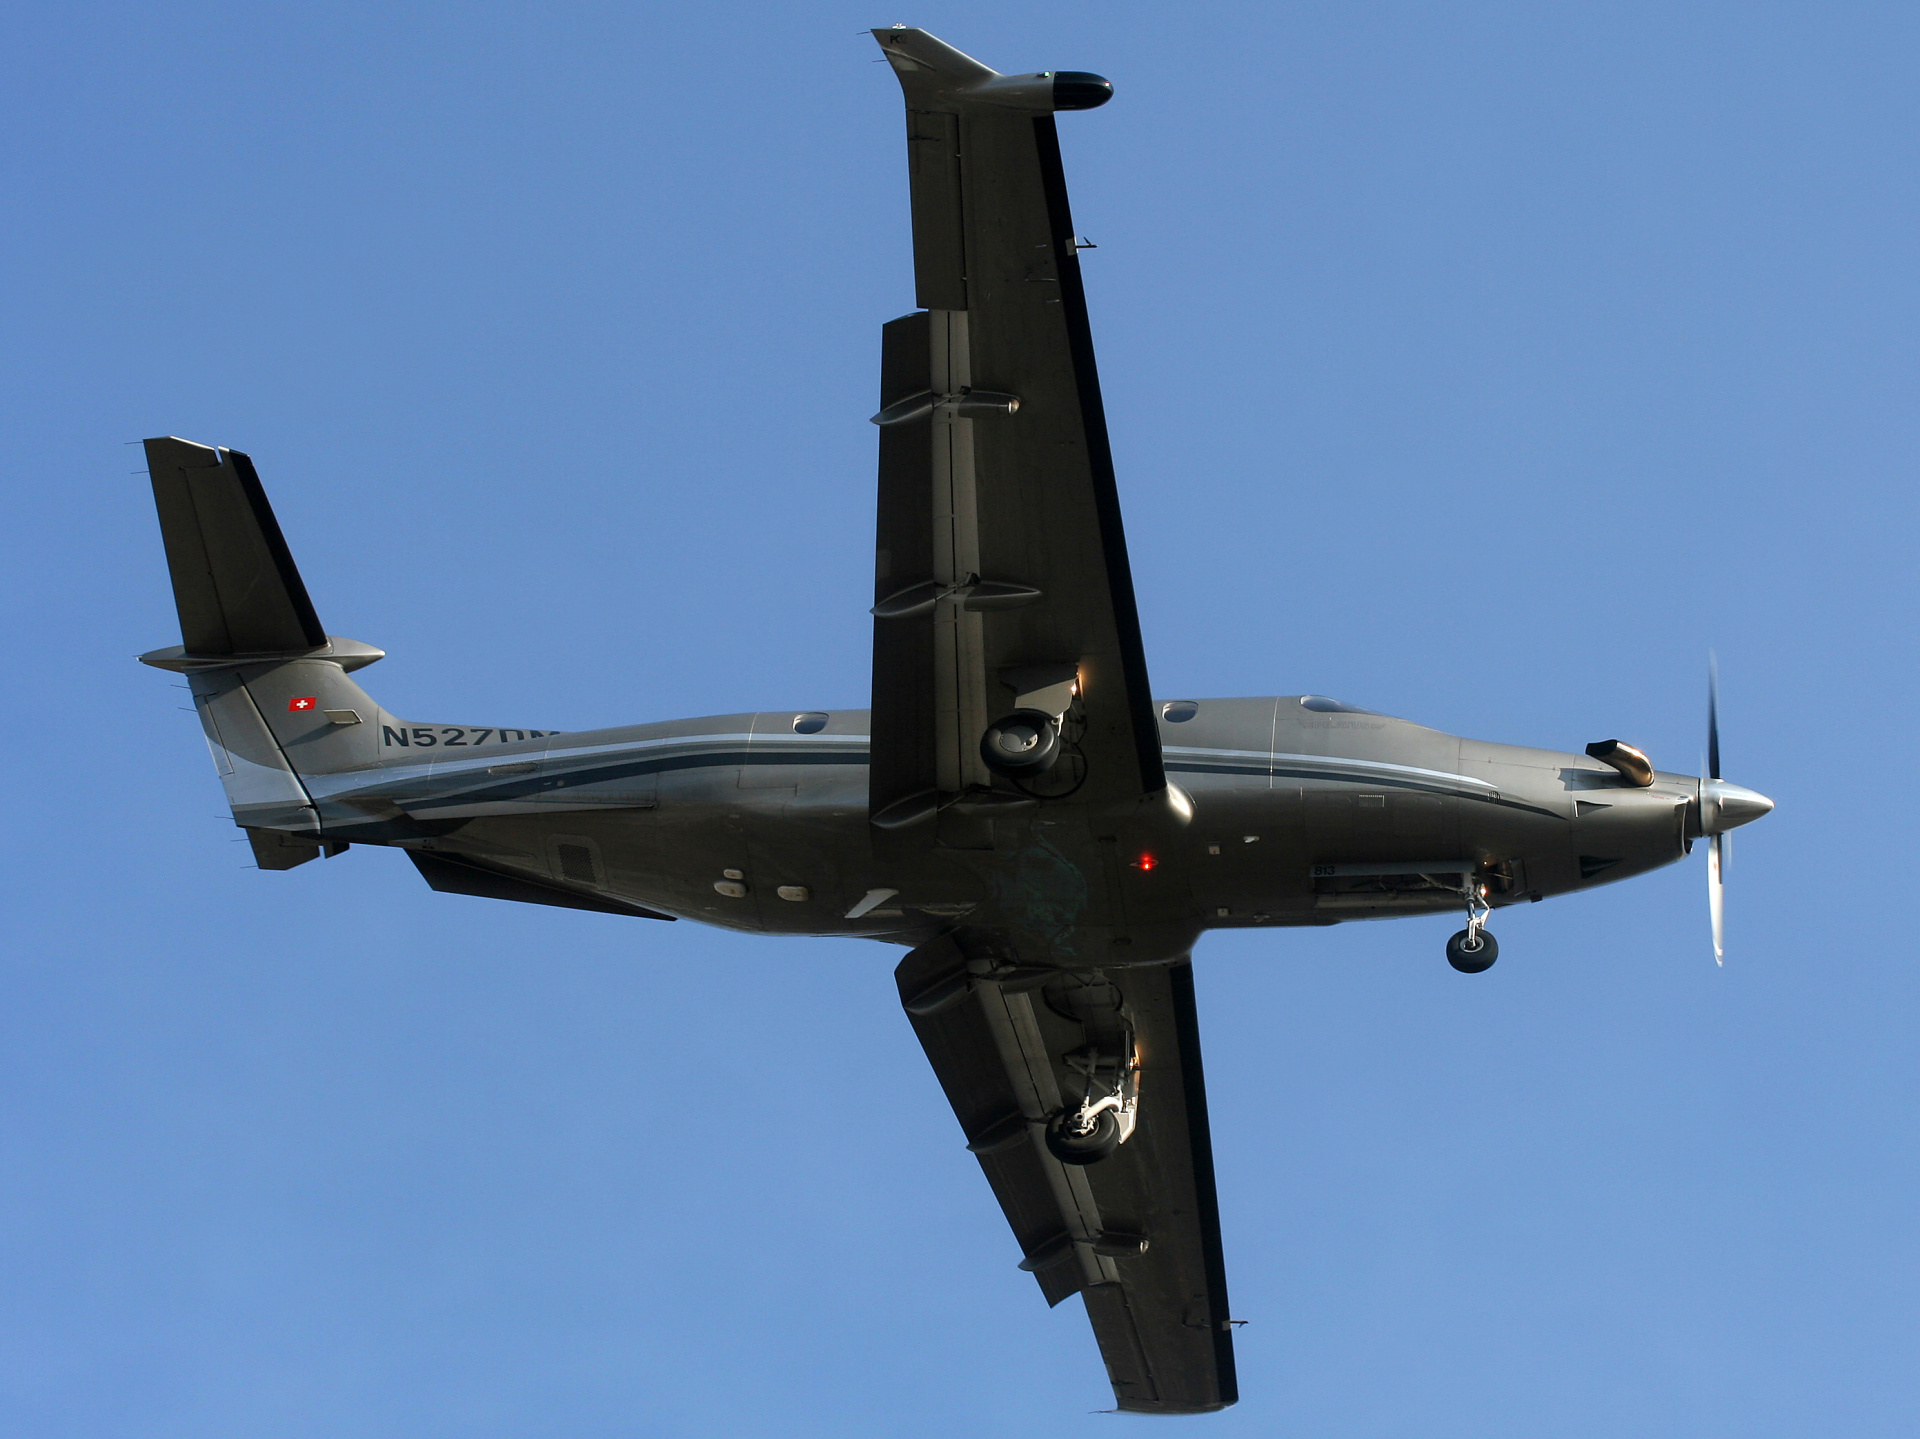 PC-12/47, N527DM, private (Aircraft » EPWA Spotting » Pilatus PC-12 and revisions)